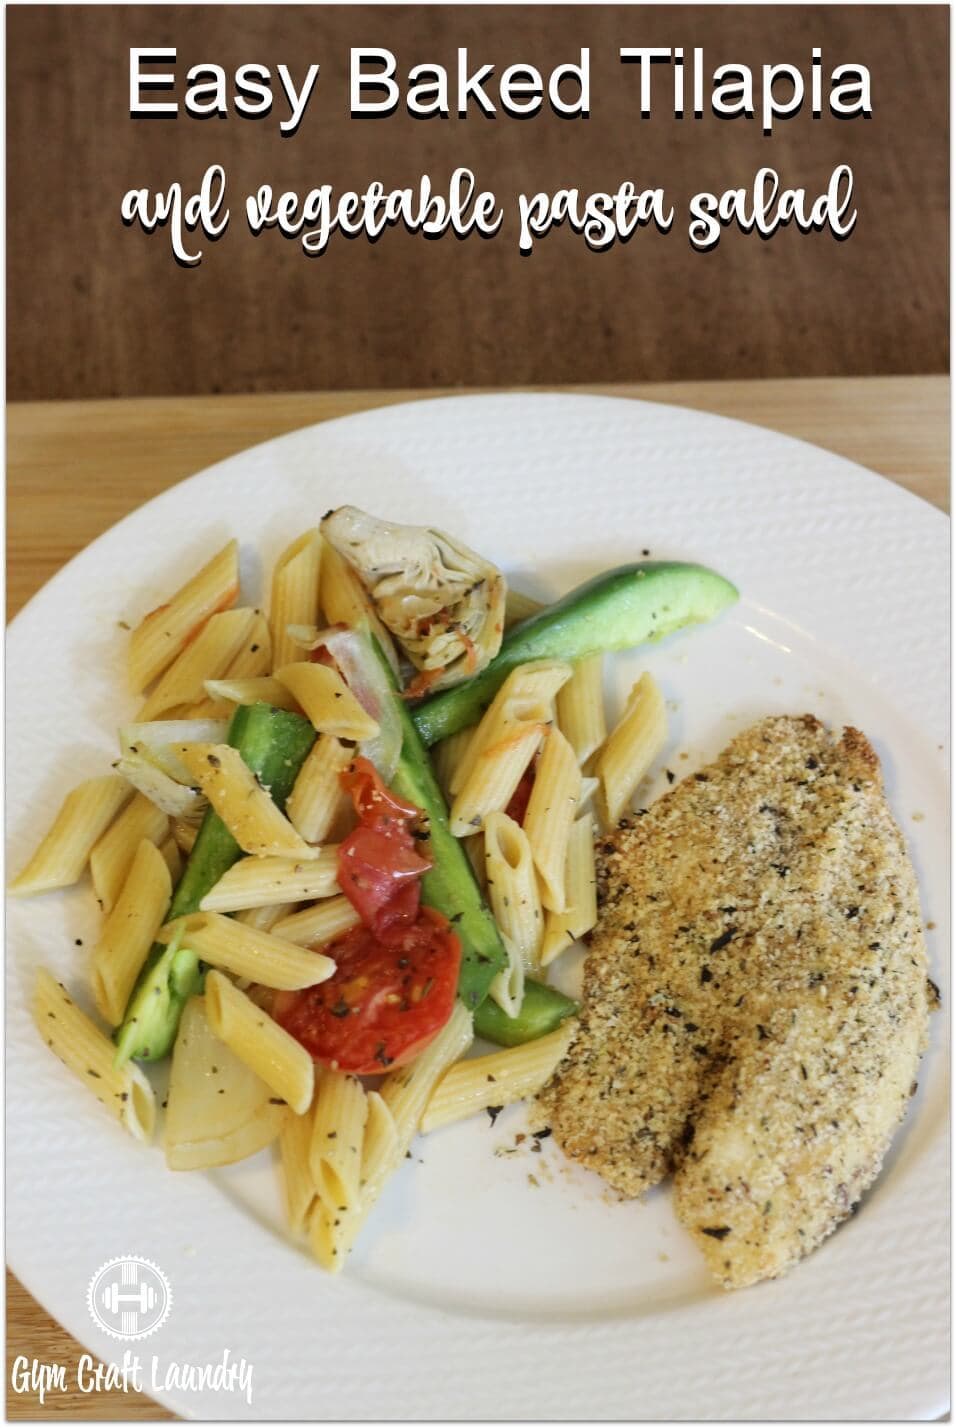 Easy Parmesan Baked Tilapia and Vegetable Pasta Salad